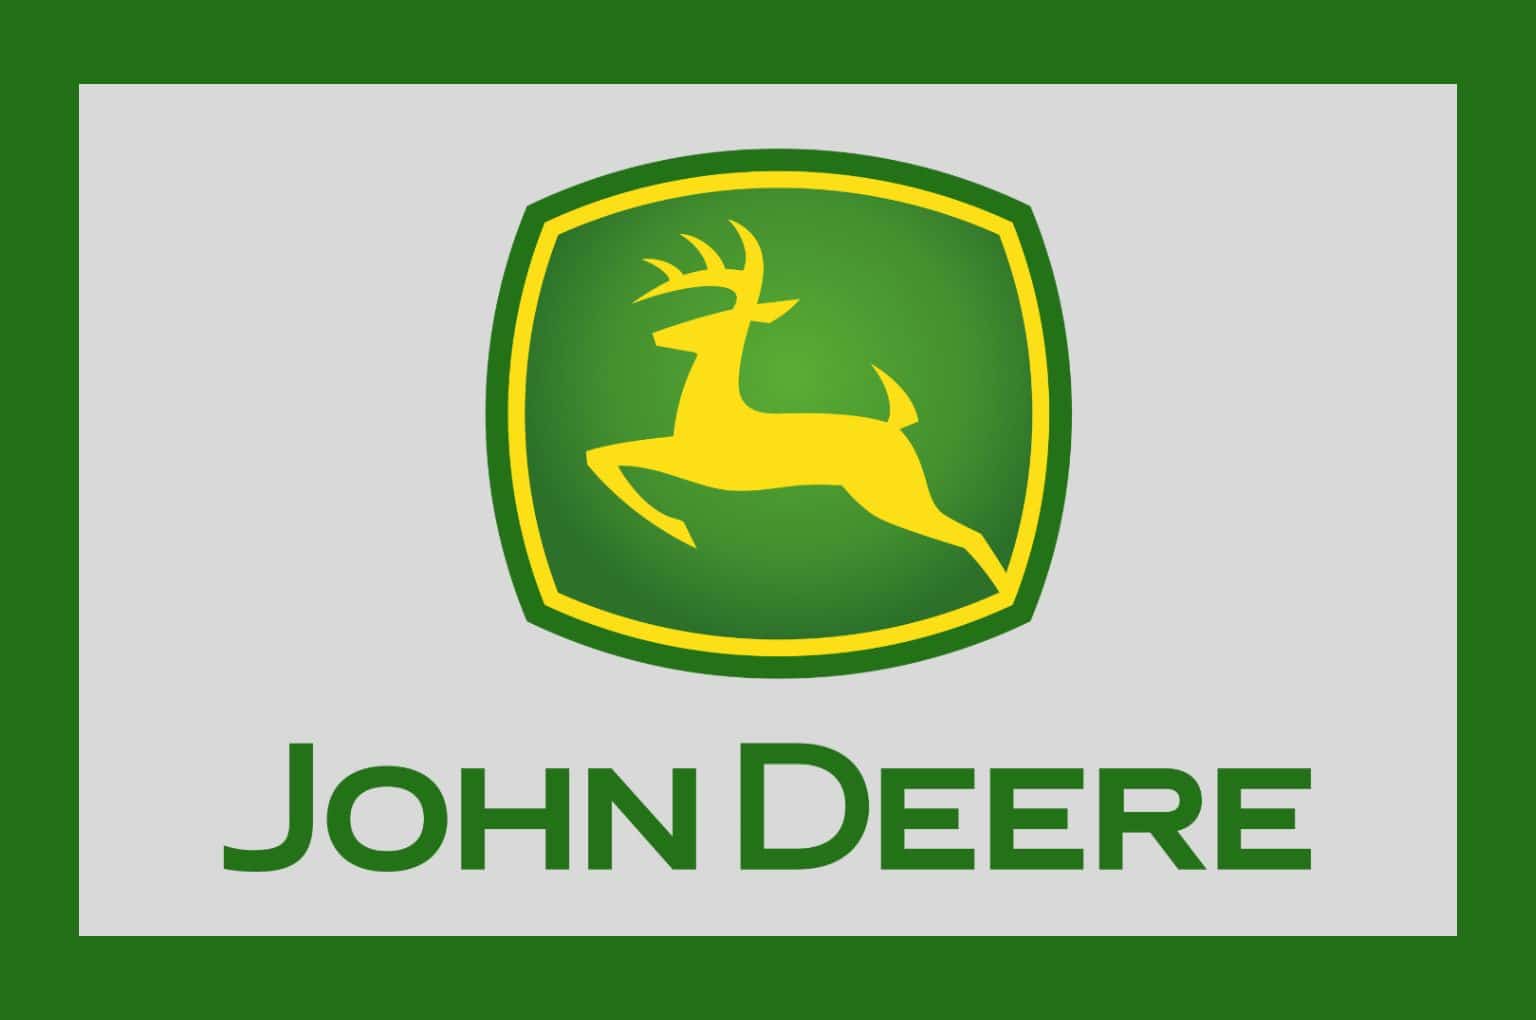 Deere performance slowing down World Agritech